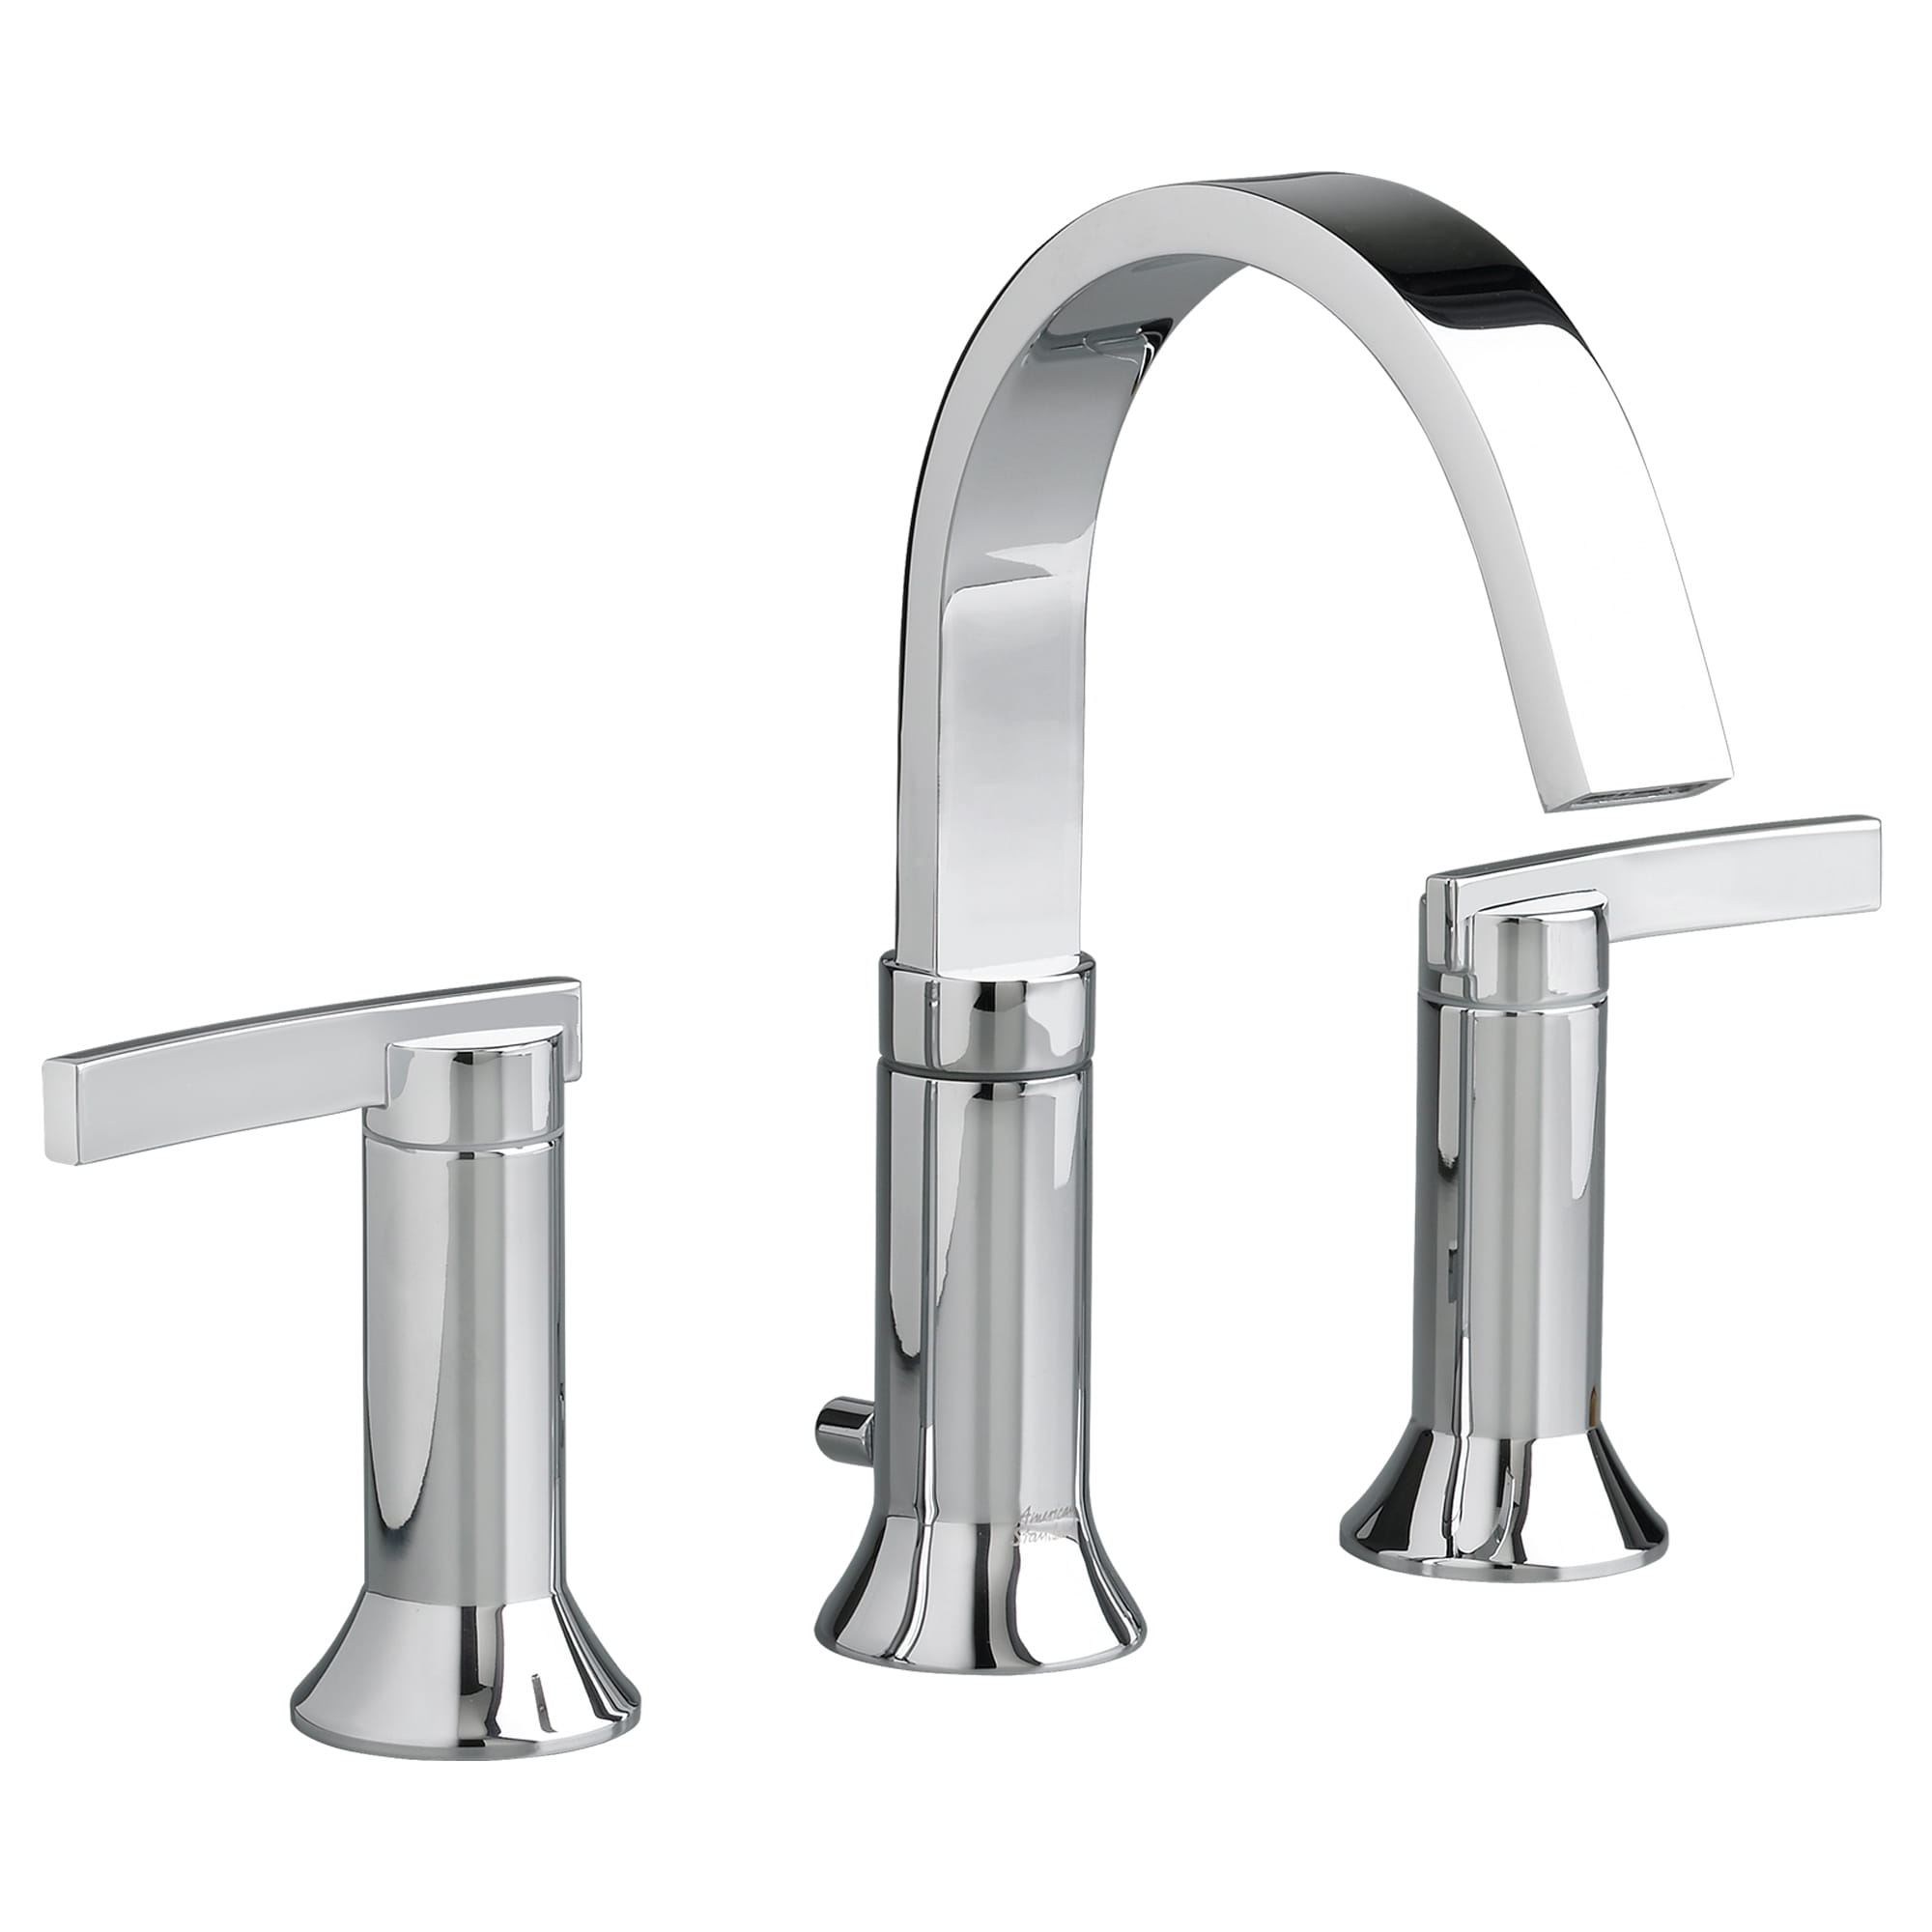 Berwick 8 Inch Widespread 2 Handle Bathroom Faucet 12 gpm 45 L min With Lever Handles CHROME